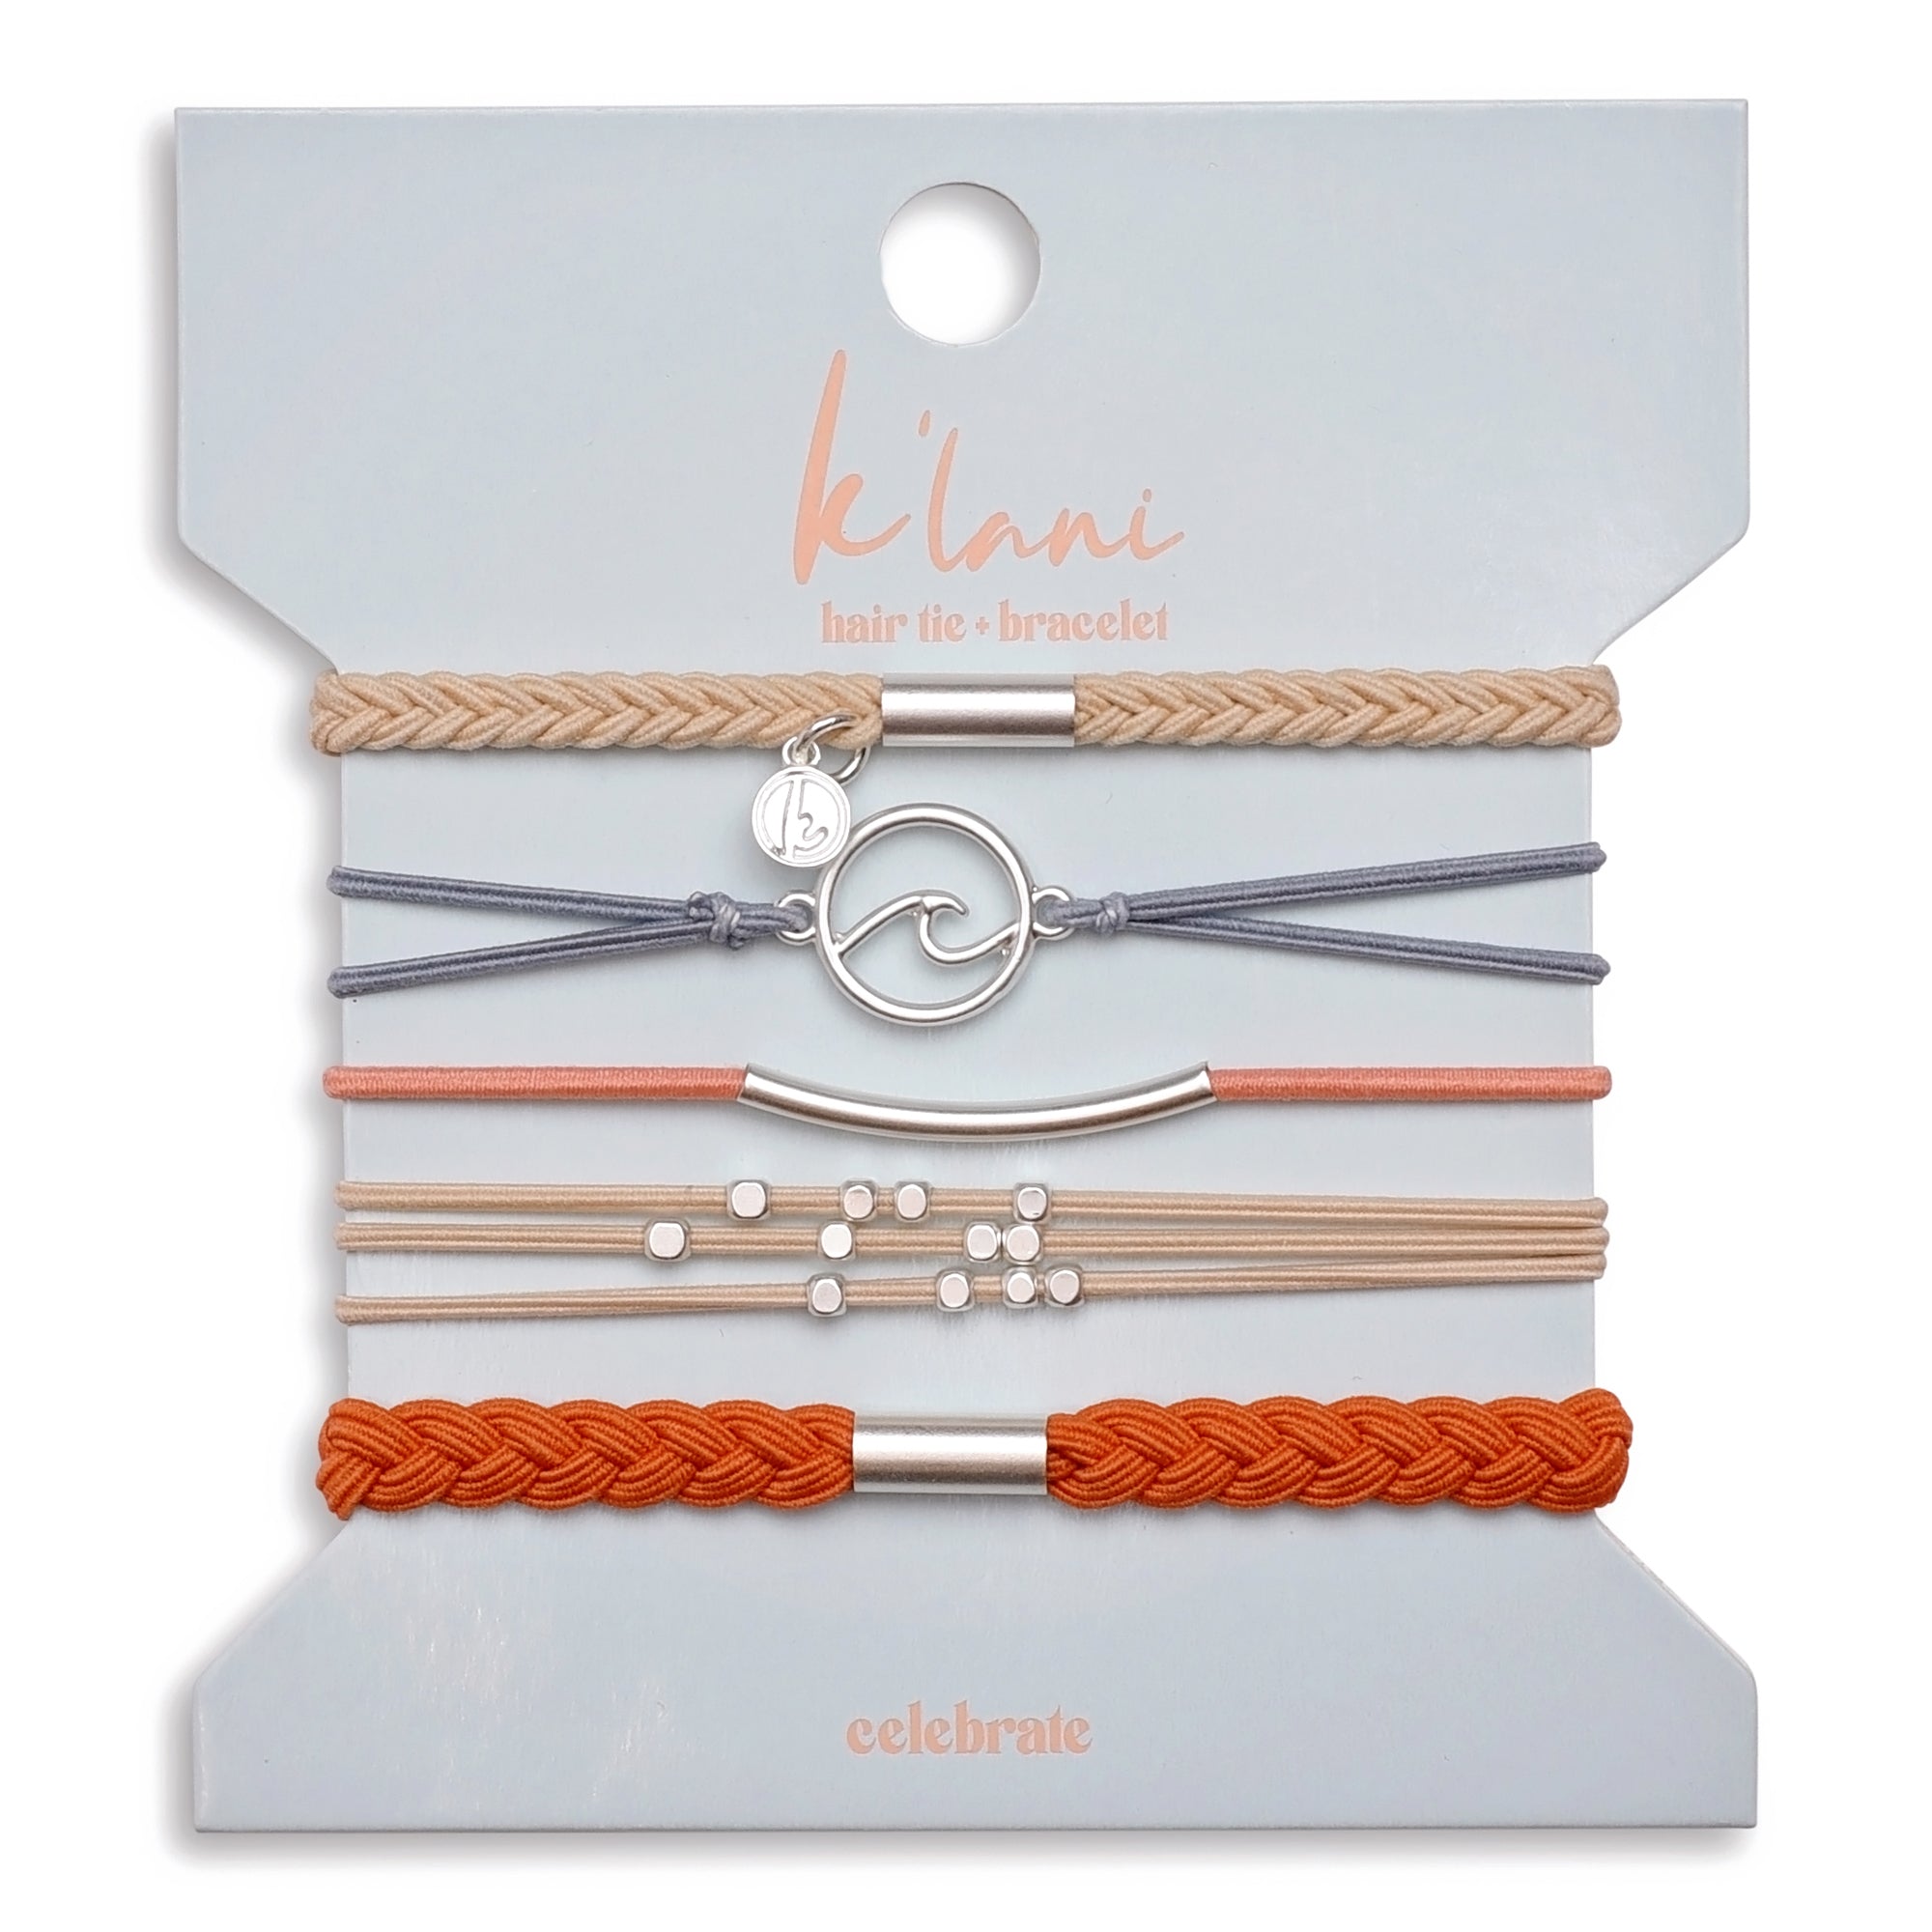 Deal of the Day: 25 percent off By Lilla hair tie stack